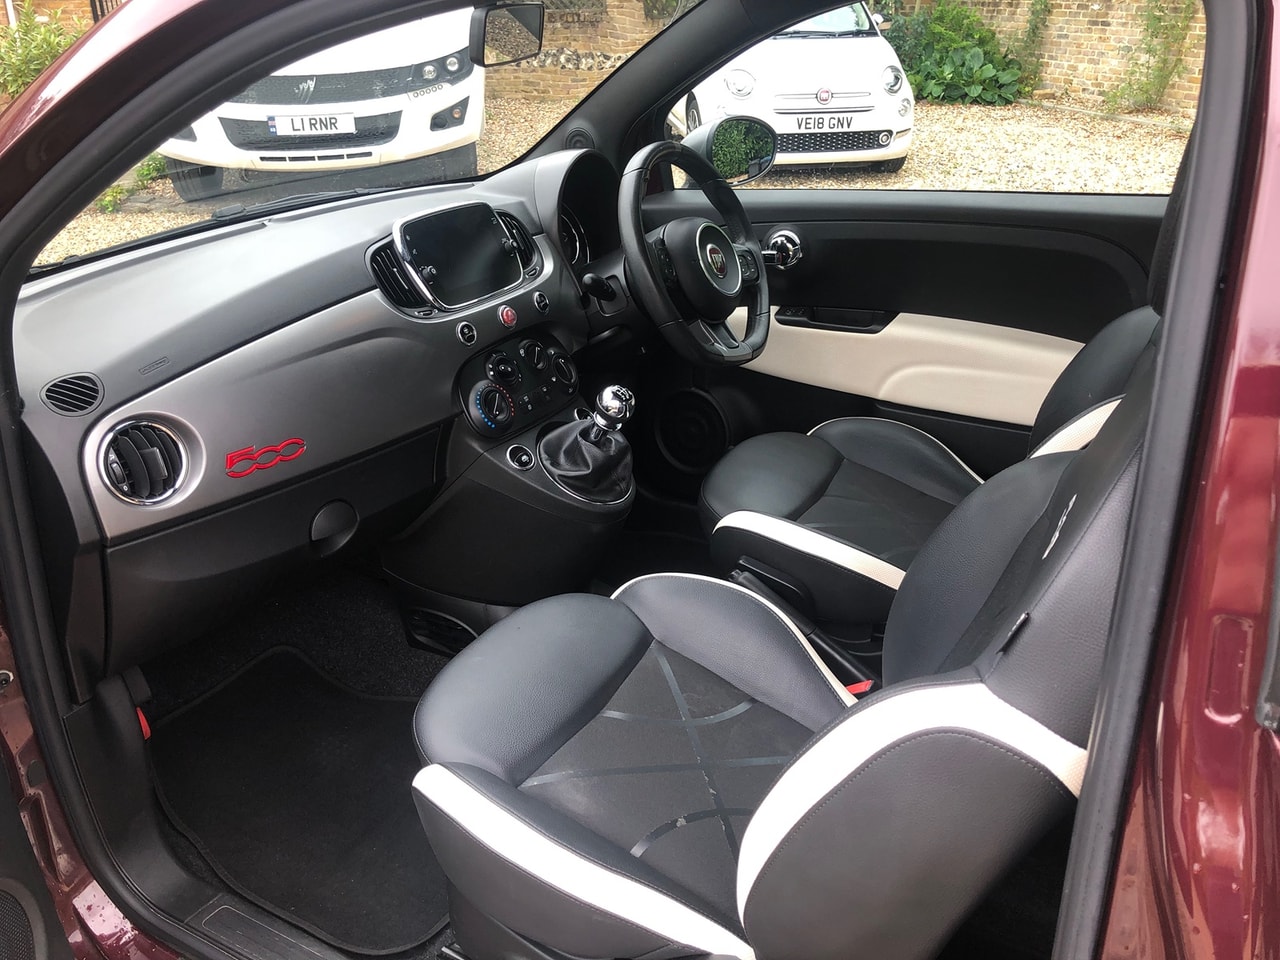 2016 FIAT 500 1.2i S S/S - Picture 10 of 11